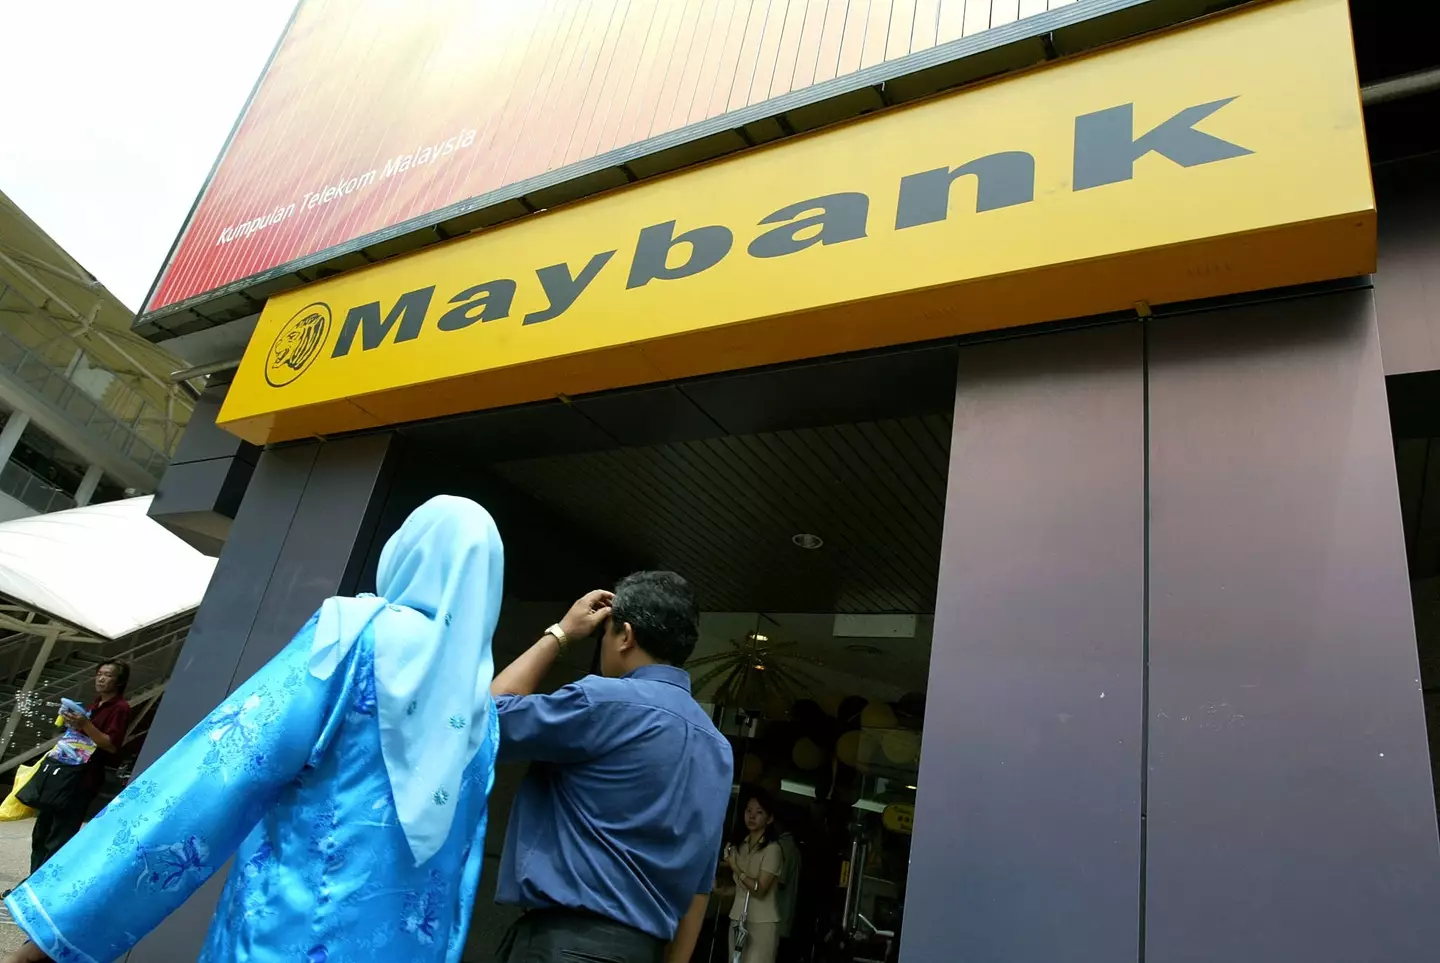 Maybank is one of the largest banks in Malaysia.